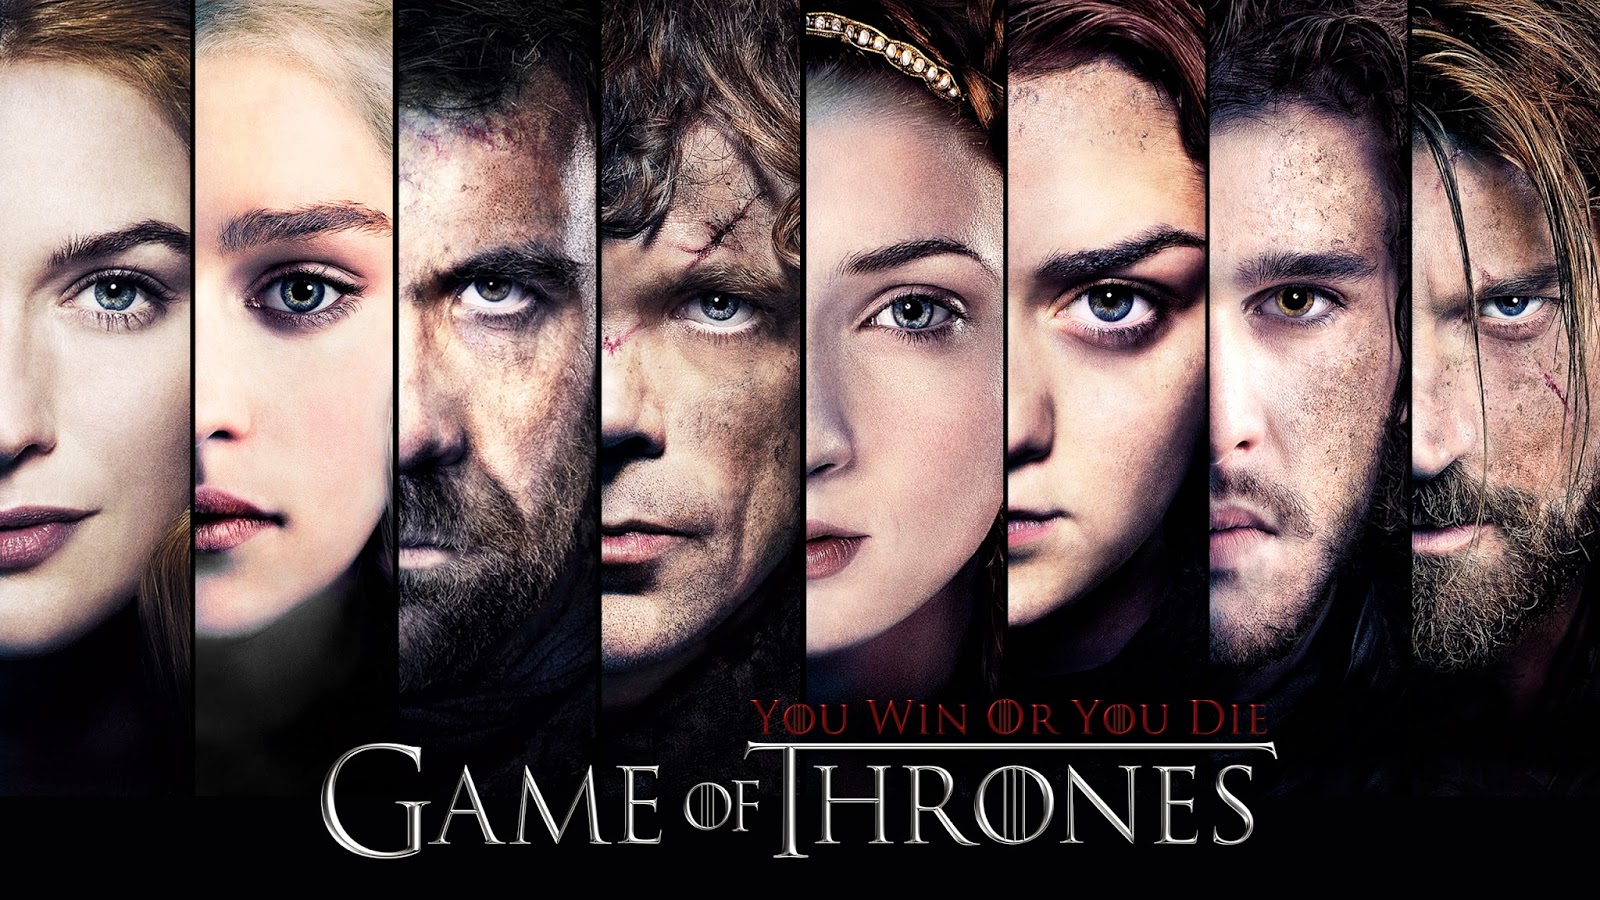 game_of_thrones_faces_by_beaware8-d7nclut.jpg